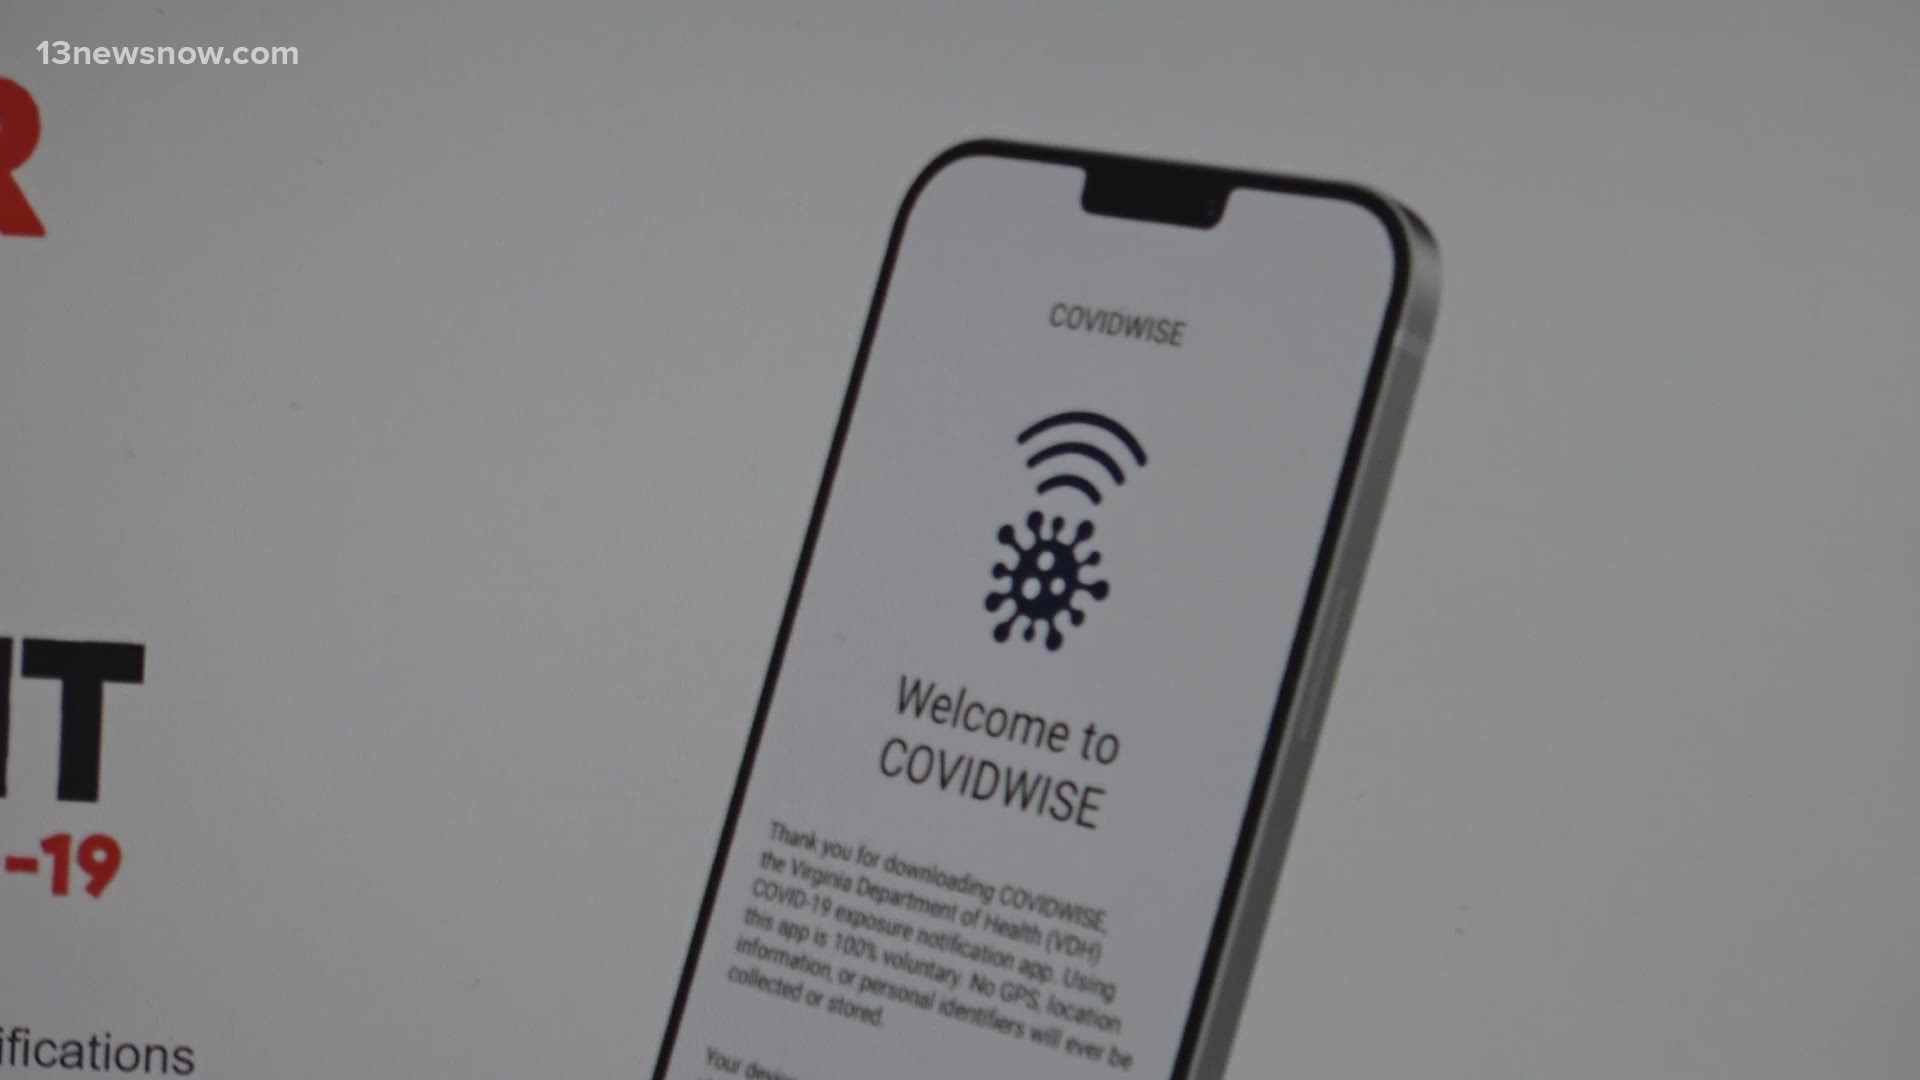 State officials emphasized that the Covidwise app doesn't track user location or collect personal information.